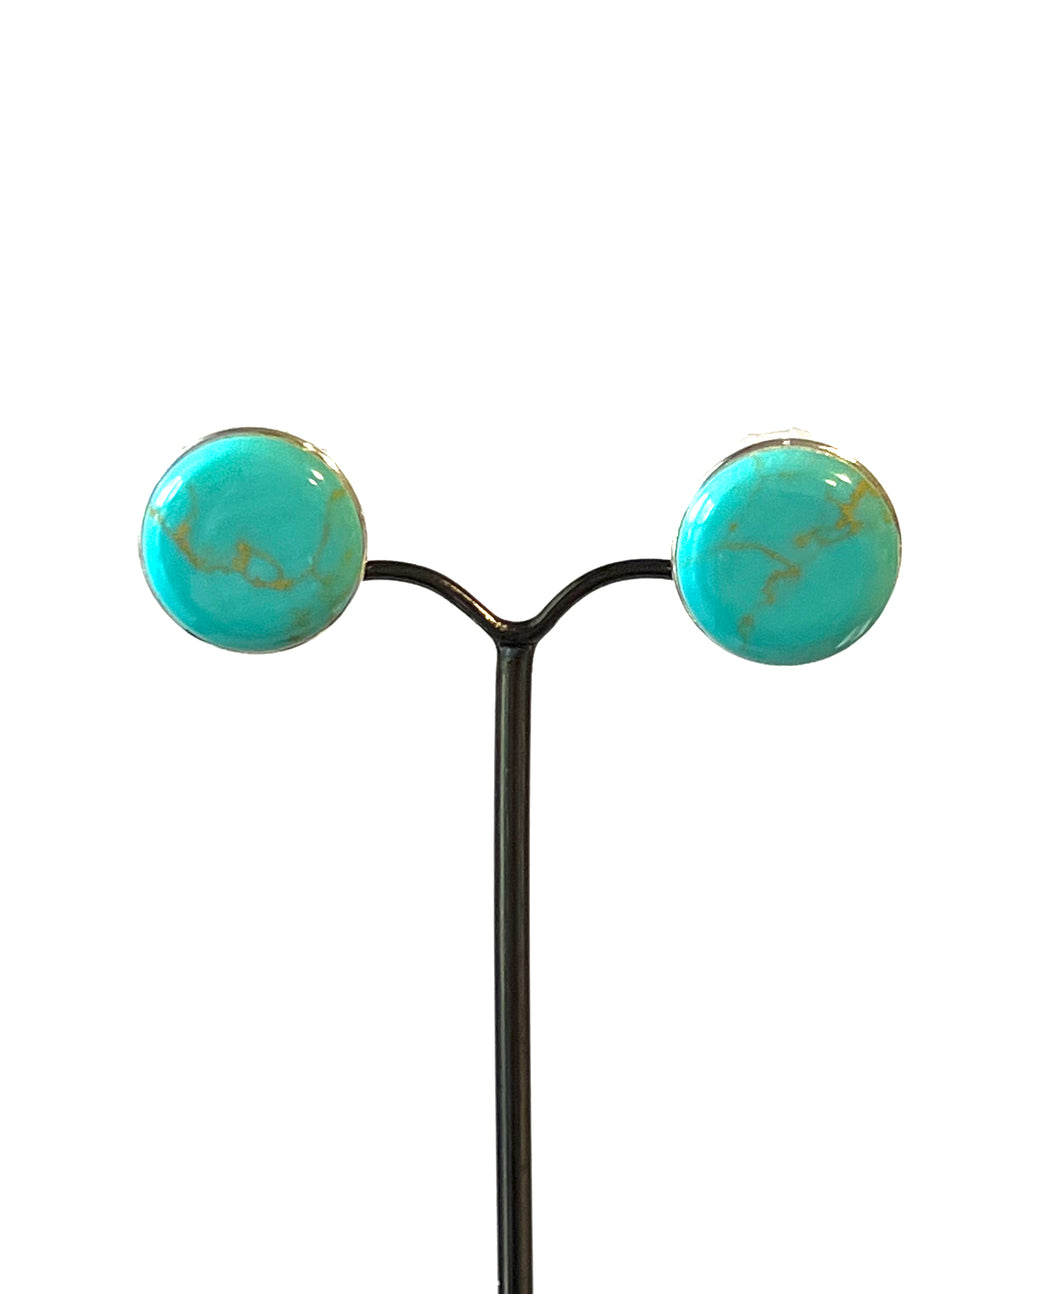 Turquoise Colour Clip On Earrings set in Sterling Silver